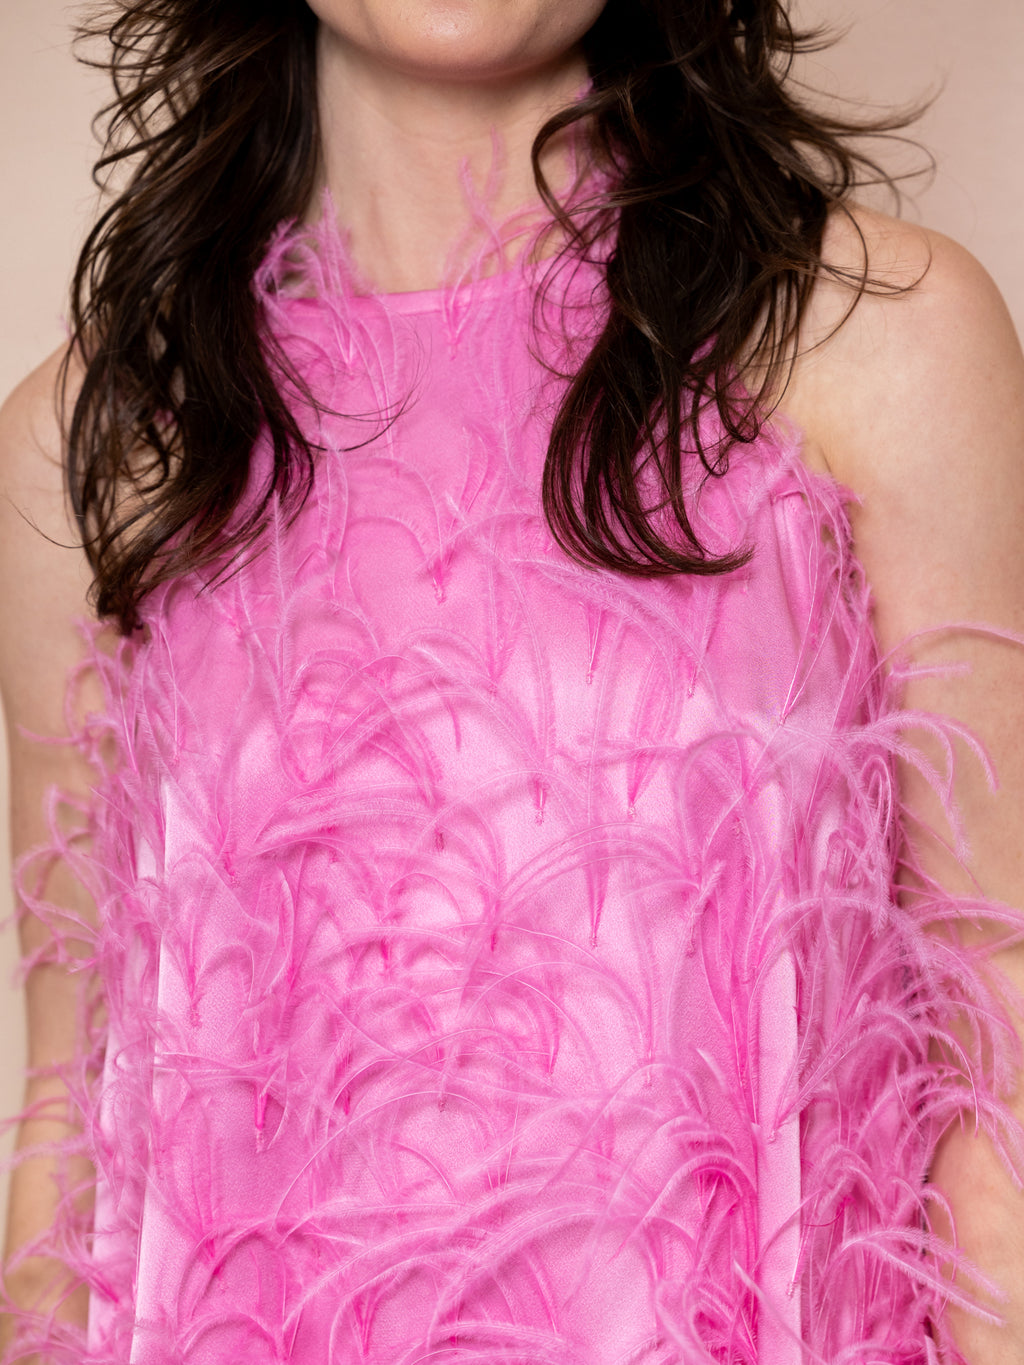 Woman wearing pink mini dress covered in feathers against pink background